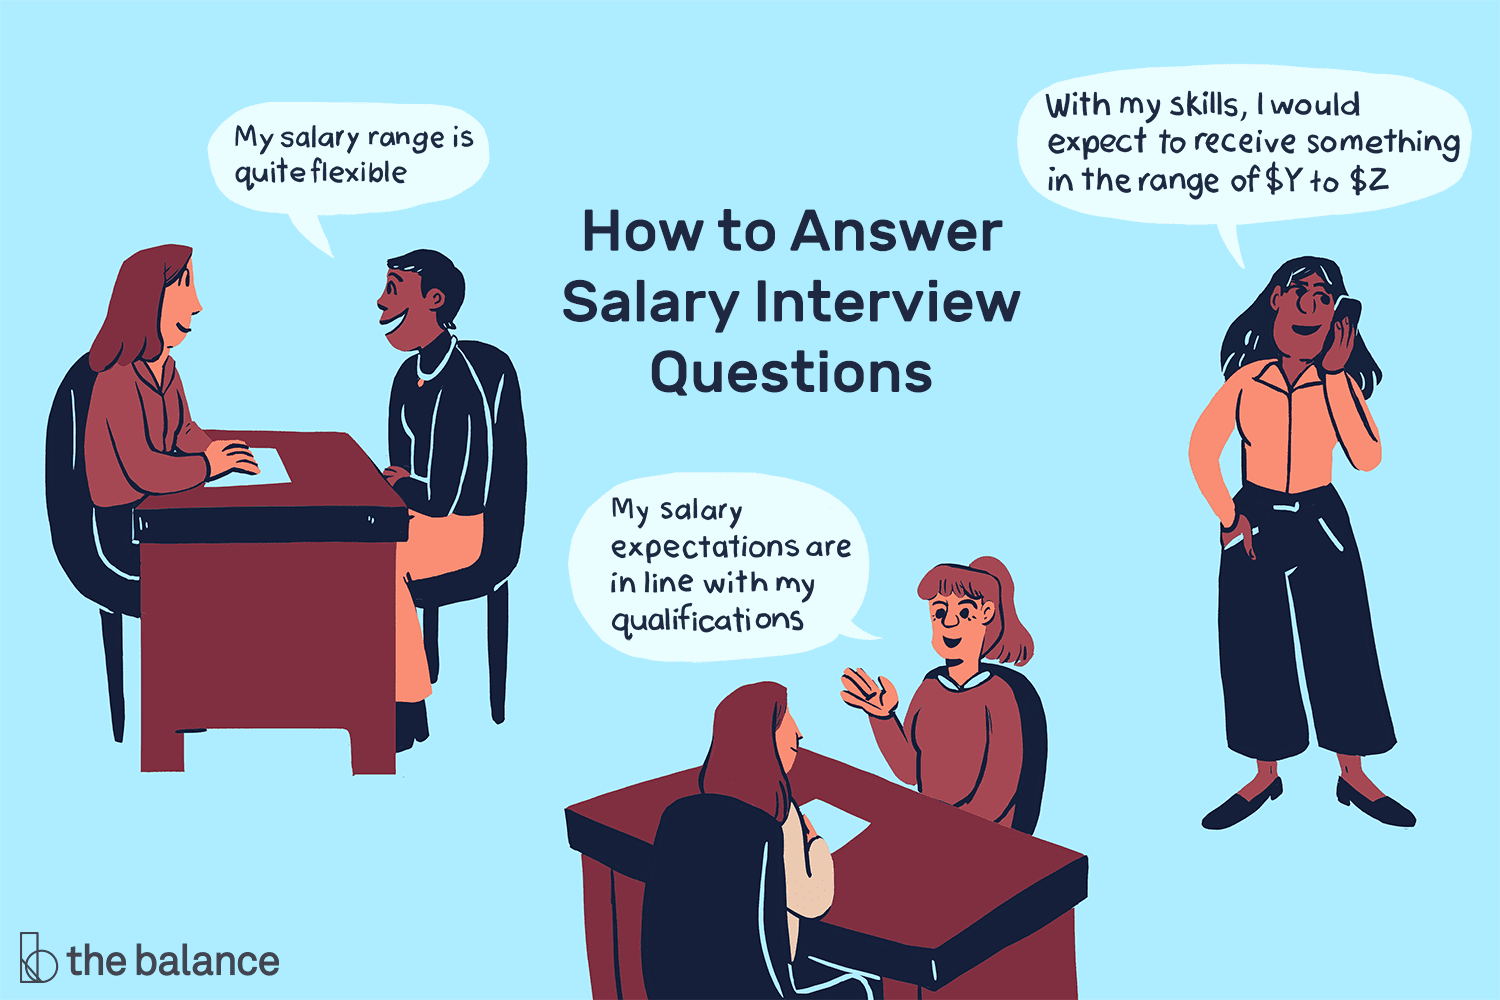 Expect asking. Salary expectations. What are your salary expectations. How to answer the question what are your salary expectations. Questions about salary.